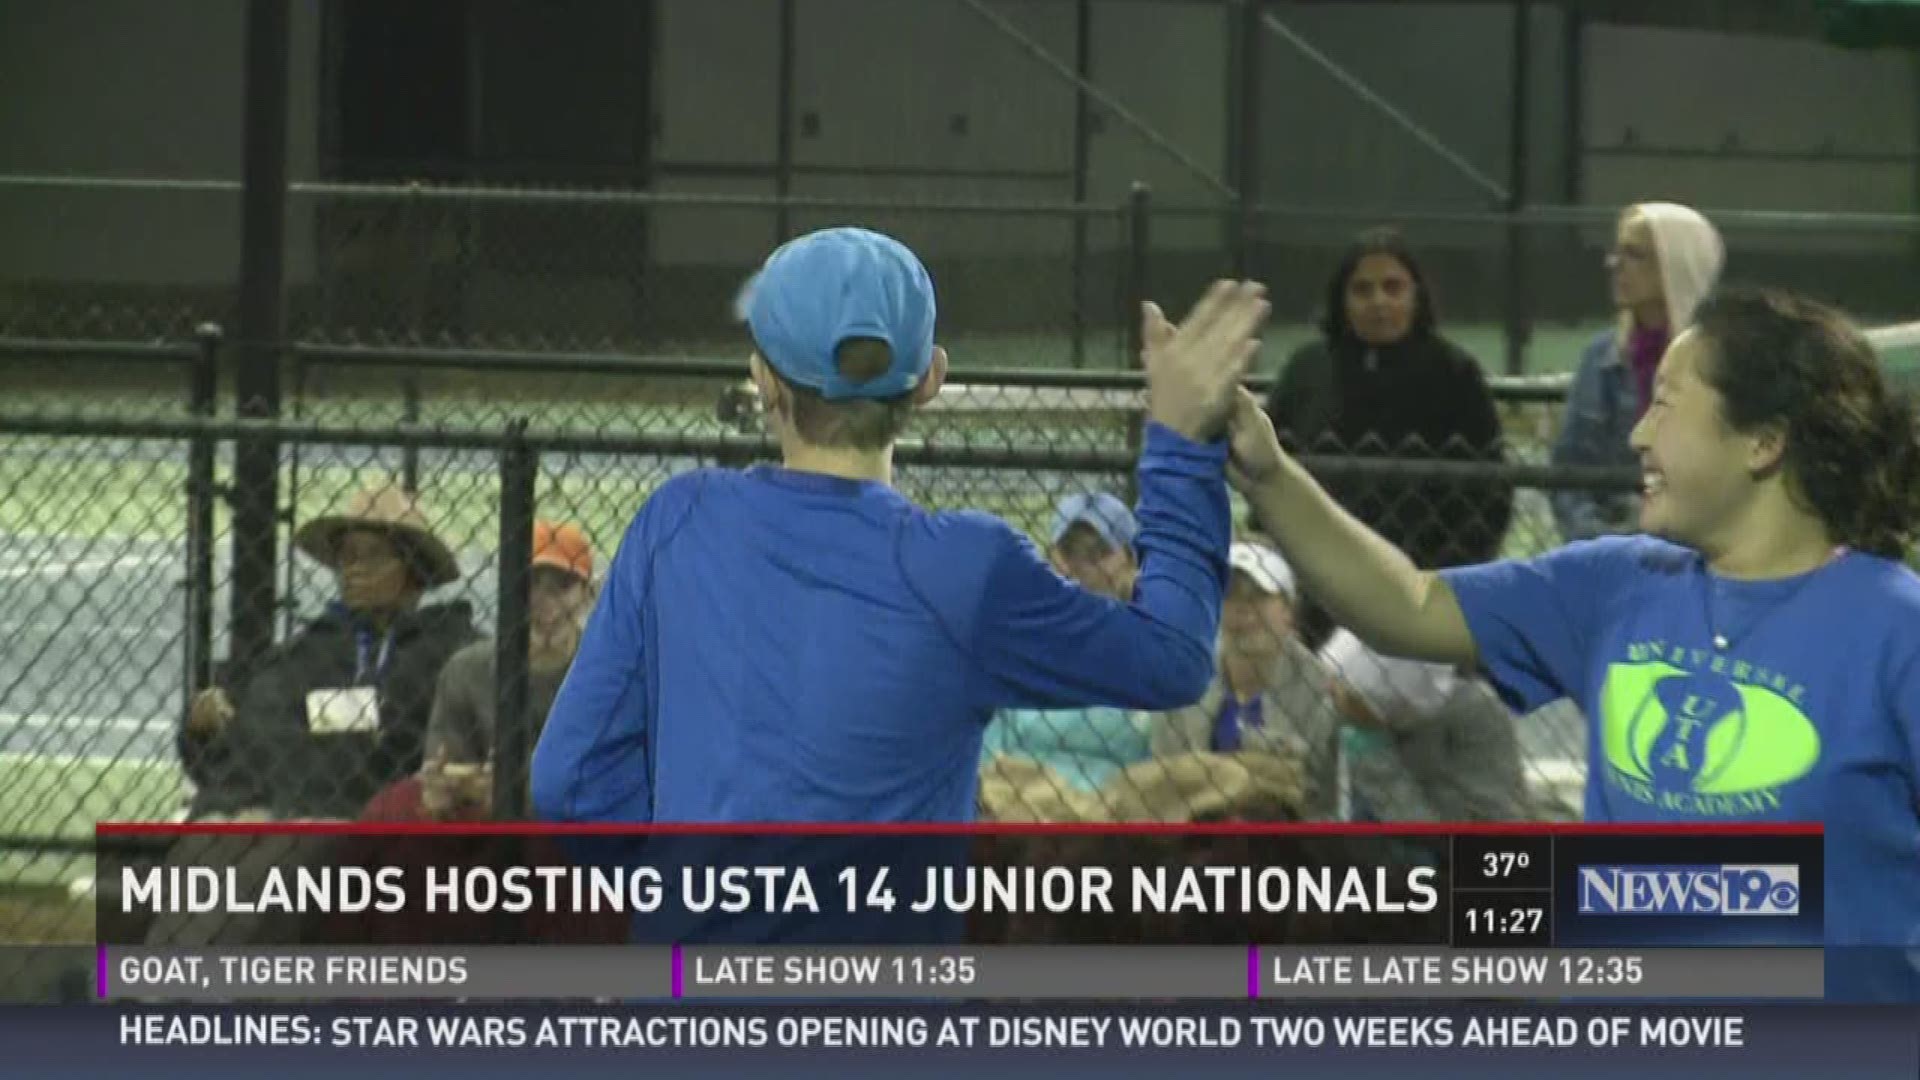 The USTA 14U Junior Nationals are being held this weekend at the Cayce Tennis Center and the Lexington County Tennis Complex.